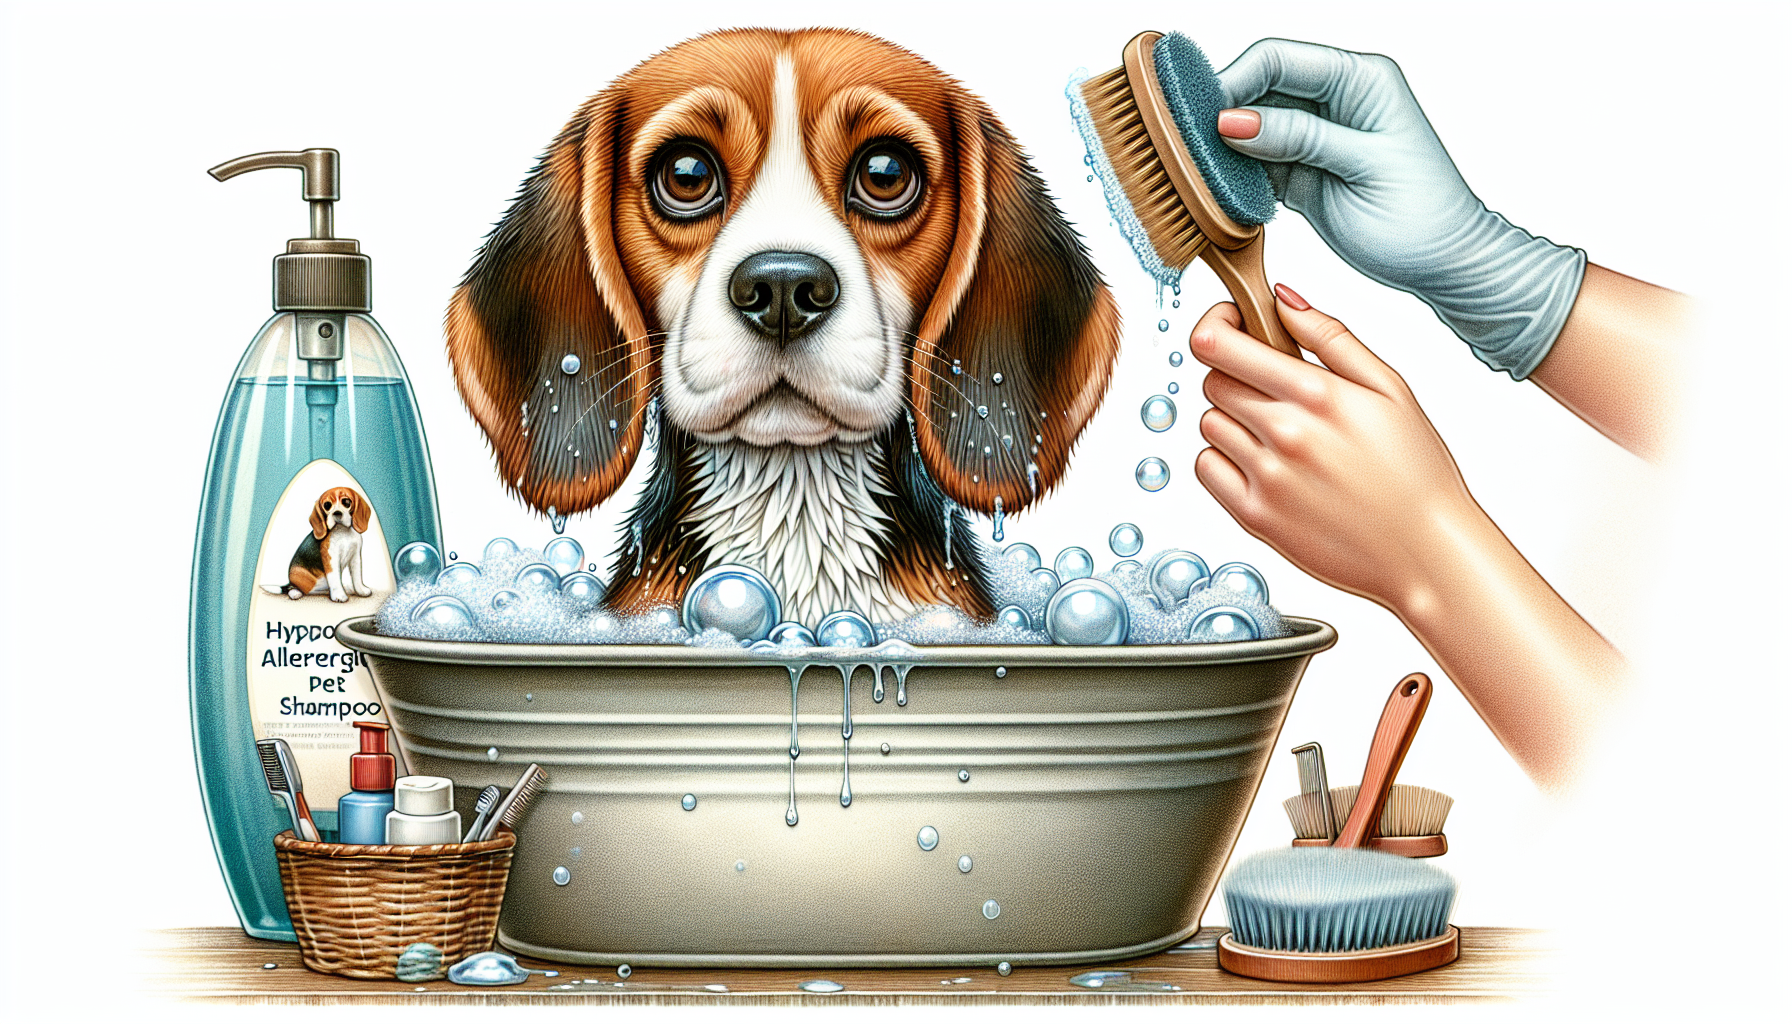 Beagle being bathed